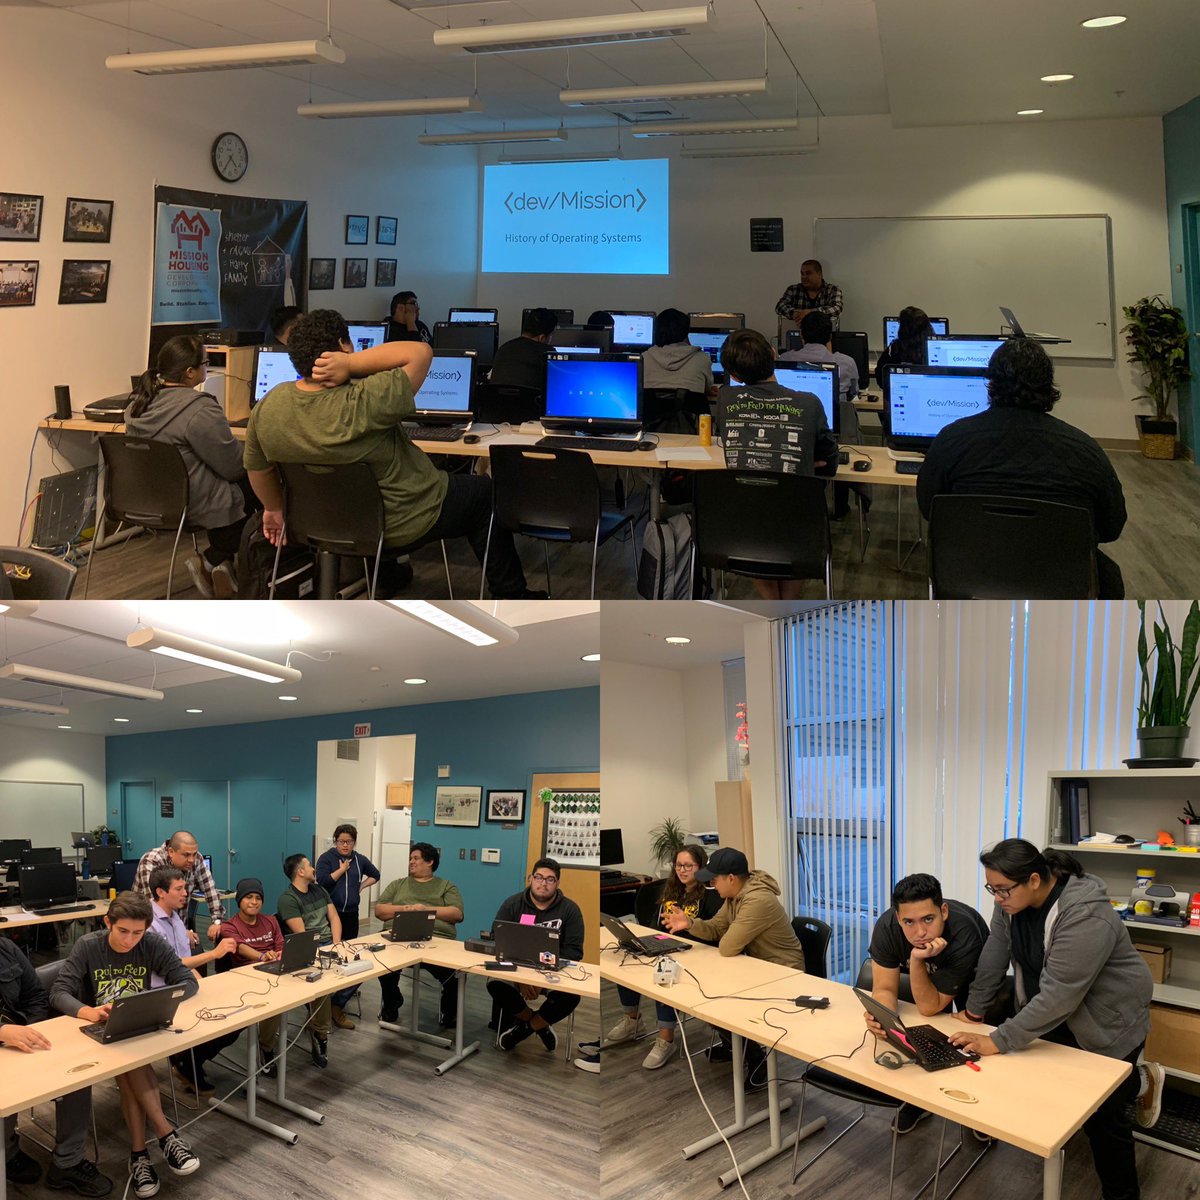 Our Fall 2018 Cohort # 5 starts with the History of OS and learning how to install Windows 10 as a clean install! #os #windows10 #ittechnician #historyofcomputers #youbelonghere